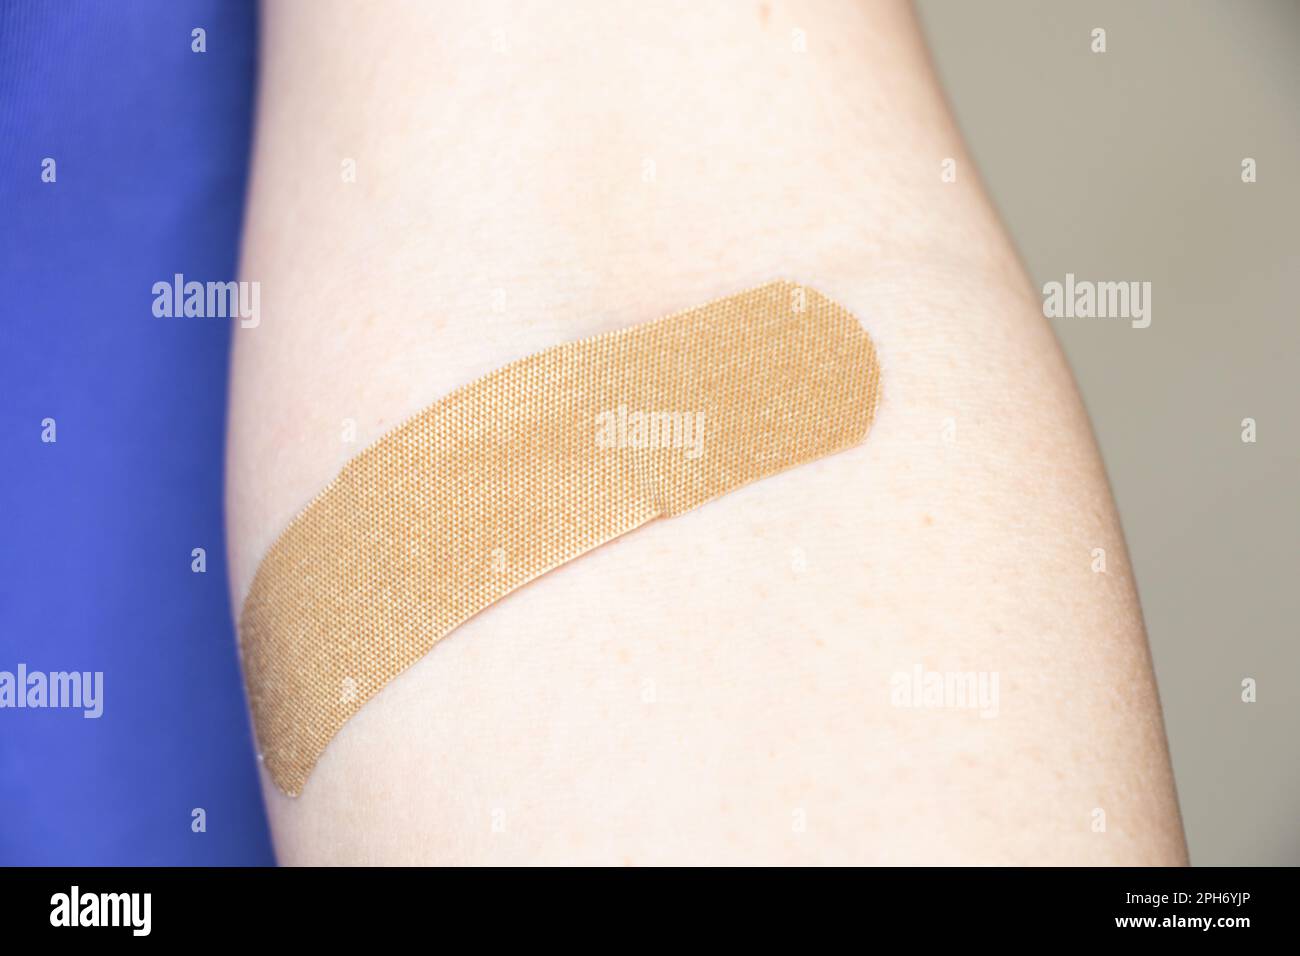 a plaster on the arm after taking blood from a vein, taking tests Stock Photo